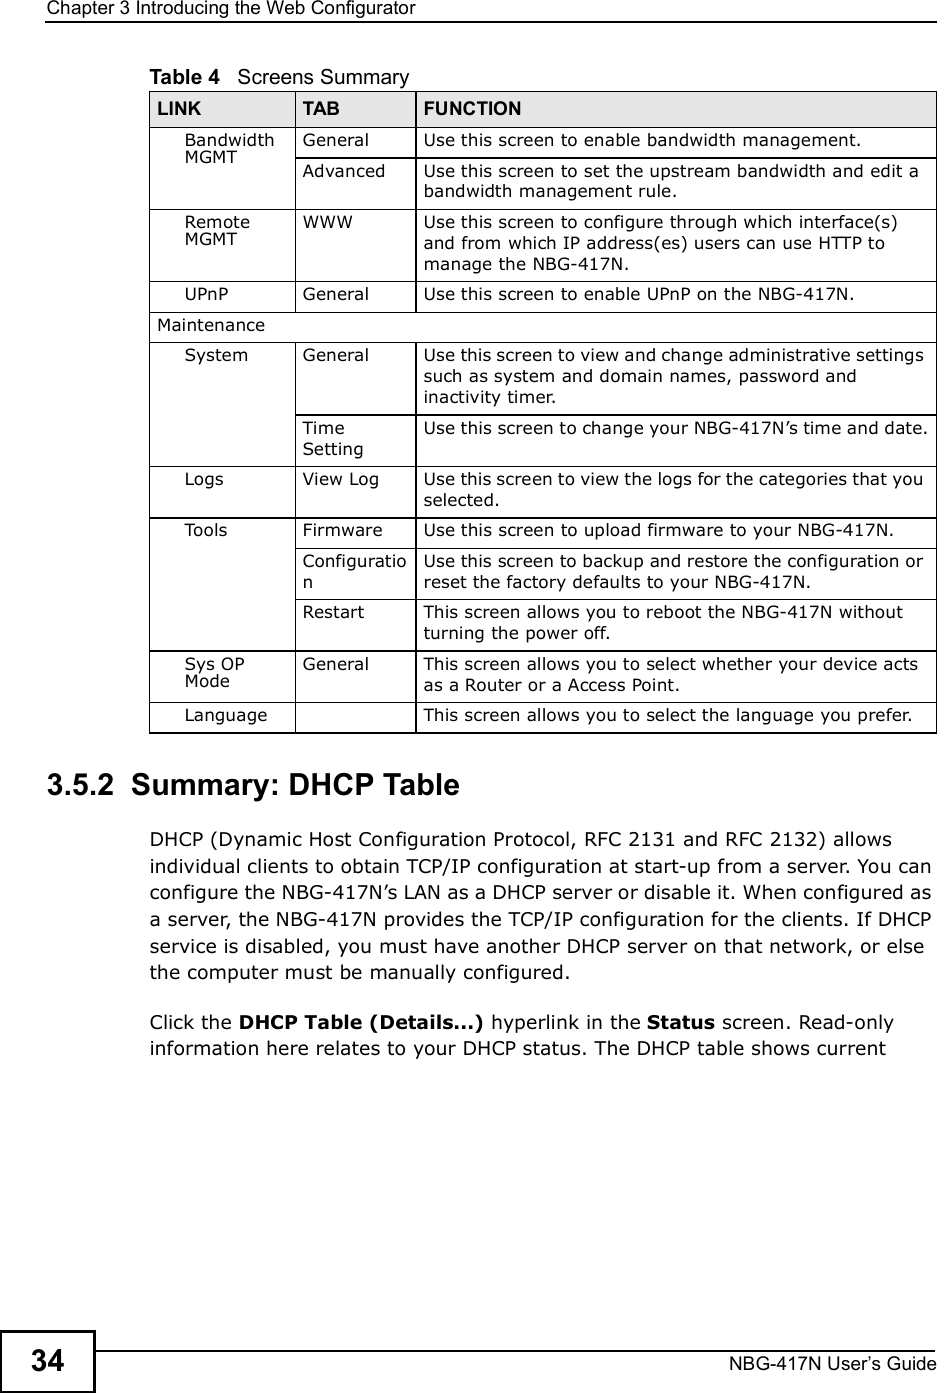 Chapter 3Introducing the Web ConfiguratorNBG-417N User s Guide343.5.2  Summary: DHCP Table    DHCP (Dynamic Host Configuration Protocol, RFC 2131 and RFC 2132) allows individual clients to obtain TCP/IP configuration at start-up from a server. You can configure the NBG-417N!s LAN as a DHCP server or disable it. When configured as a server, the NBG-417N provides the TCP/IP configuration for the clients. If DHCP service is disabled, you must have another DHCP server on that network, or else the computer must be manually configured.Click the DHCP Table (Details...) hyperlink in the Status screen. Read-only information here relates to your DHCP status. The DHCP table shows current Bandwidth MGMTGeneral Use this screen to enable bandwidth management.Advanced Use this screen to set the upstream bandwidth and edit a bandwidth management rule.Remote MGMTWWW Use this screen to configure through which interface(s) and from which IP address(es) users can use HTTP to manage the NBG-417N.UPnP General Use this screen to enable UPnP on the NBG-417N. MaintenanceSystem General Use this screen to view and change administrative settings such as system and domain names, password and inactivity timer.Time SettingUse this screen to change your NBG-417N!s time and date.Logs View Log Use this screen to view the logs for the categories that you selected.Tools Firmware Use this screen to upload firmware to your NBG-417N.ConfigurationUse this screen to backup and restore the configuration or reset the factory defaults to your NBG-417N. Restart This screen allows you to reboot the NBG-417N without turning the power off.Sys OP ModeGeneral This screen allows you to select whether your device acts as a Router or a Access Point.Language This screen allows you to select the language you prefer.Table 4   Screens SummaryLINK TAB FUNCTION